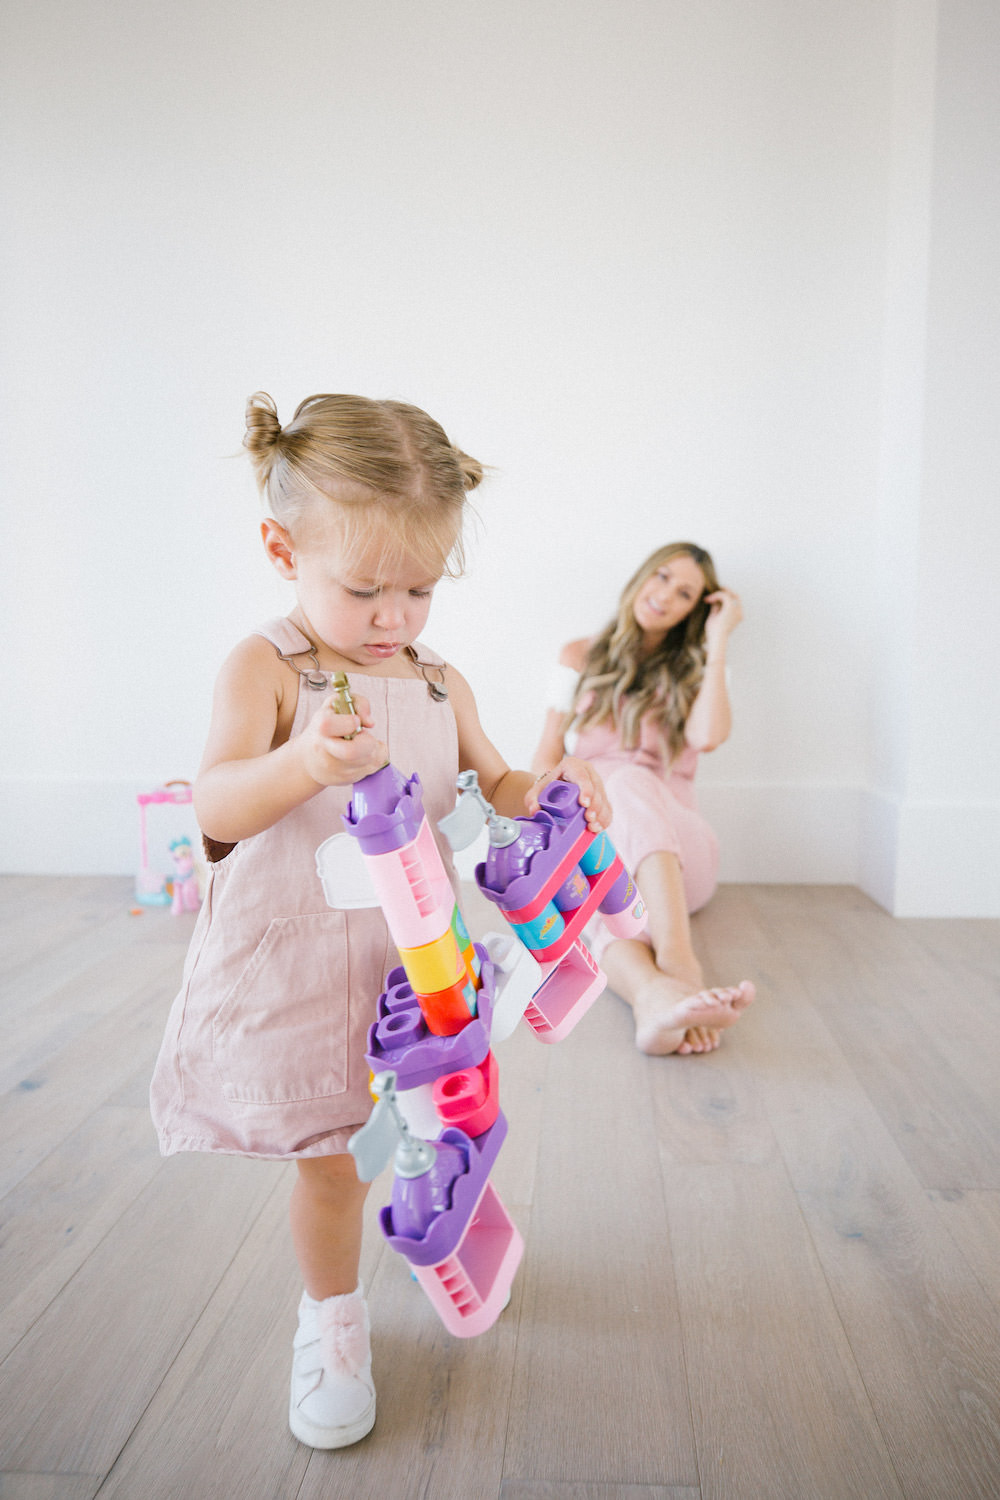 Dash of Darling | Teaching Your Toddler Through Play Based Learning